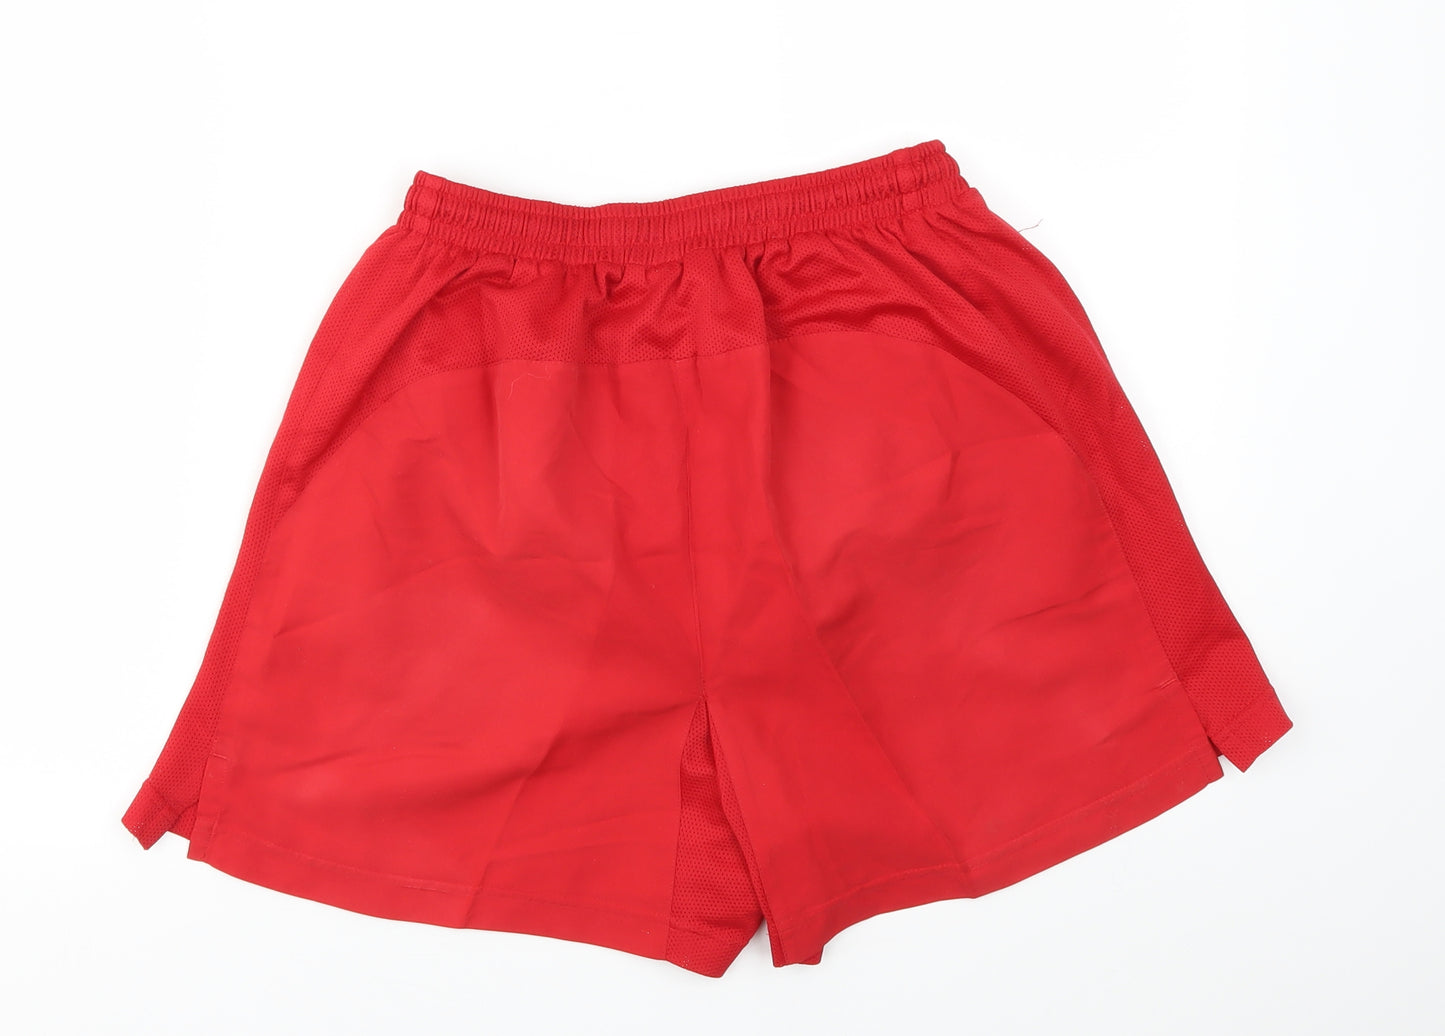 Tombo Mens Red   Sweat Shorts Size S